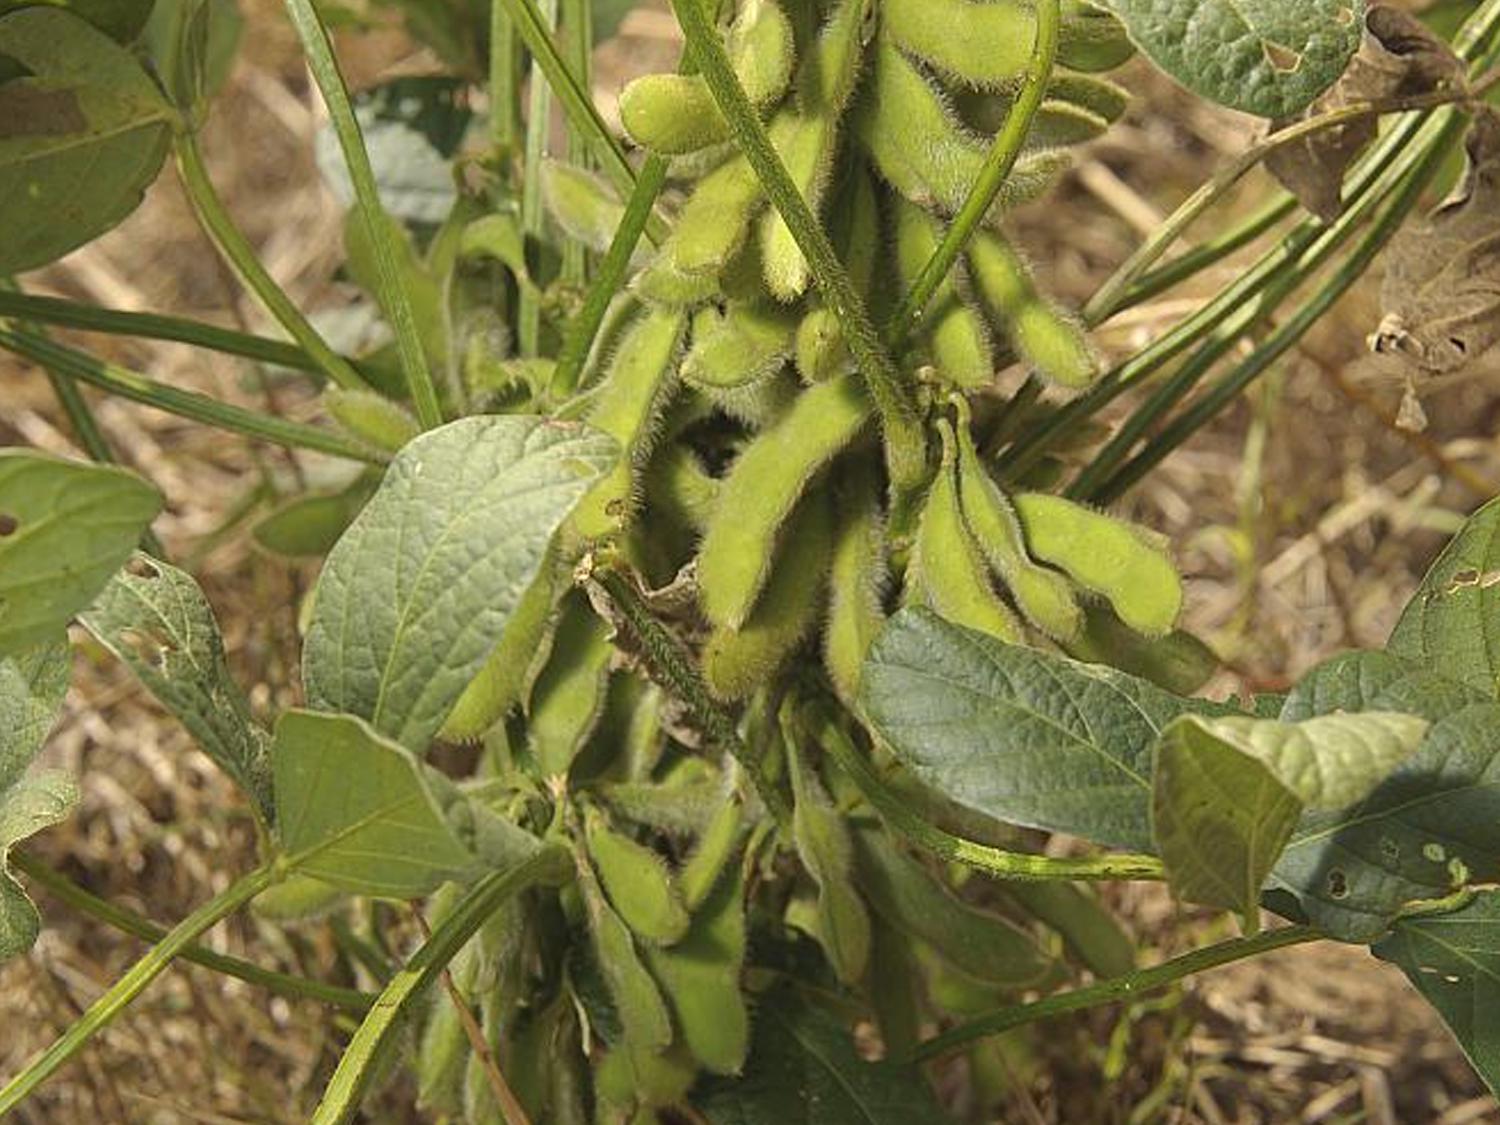 Soybeans remain Mississippi's largest crop with 2.3 million acres expected, according to a March 31 report by the U.S. Department of Agriculture. (MSU Ag Communications file photo/Kevin Hudson)